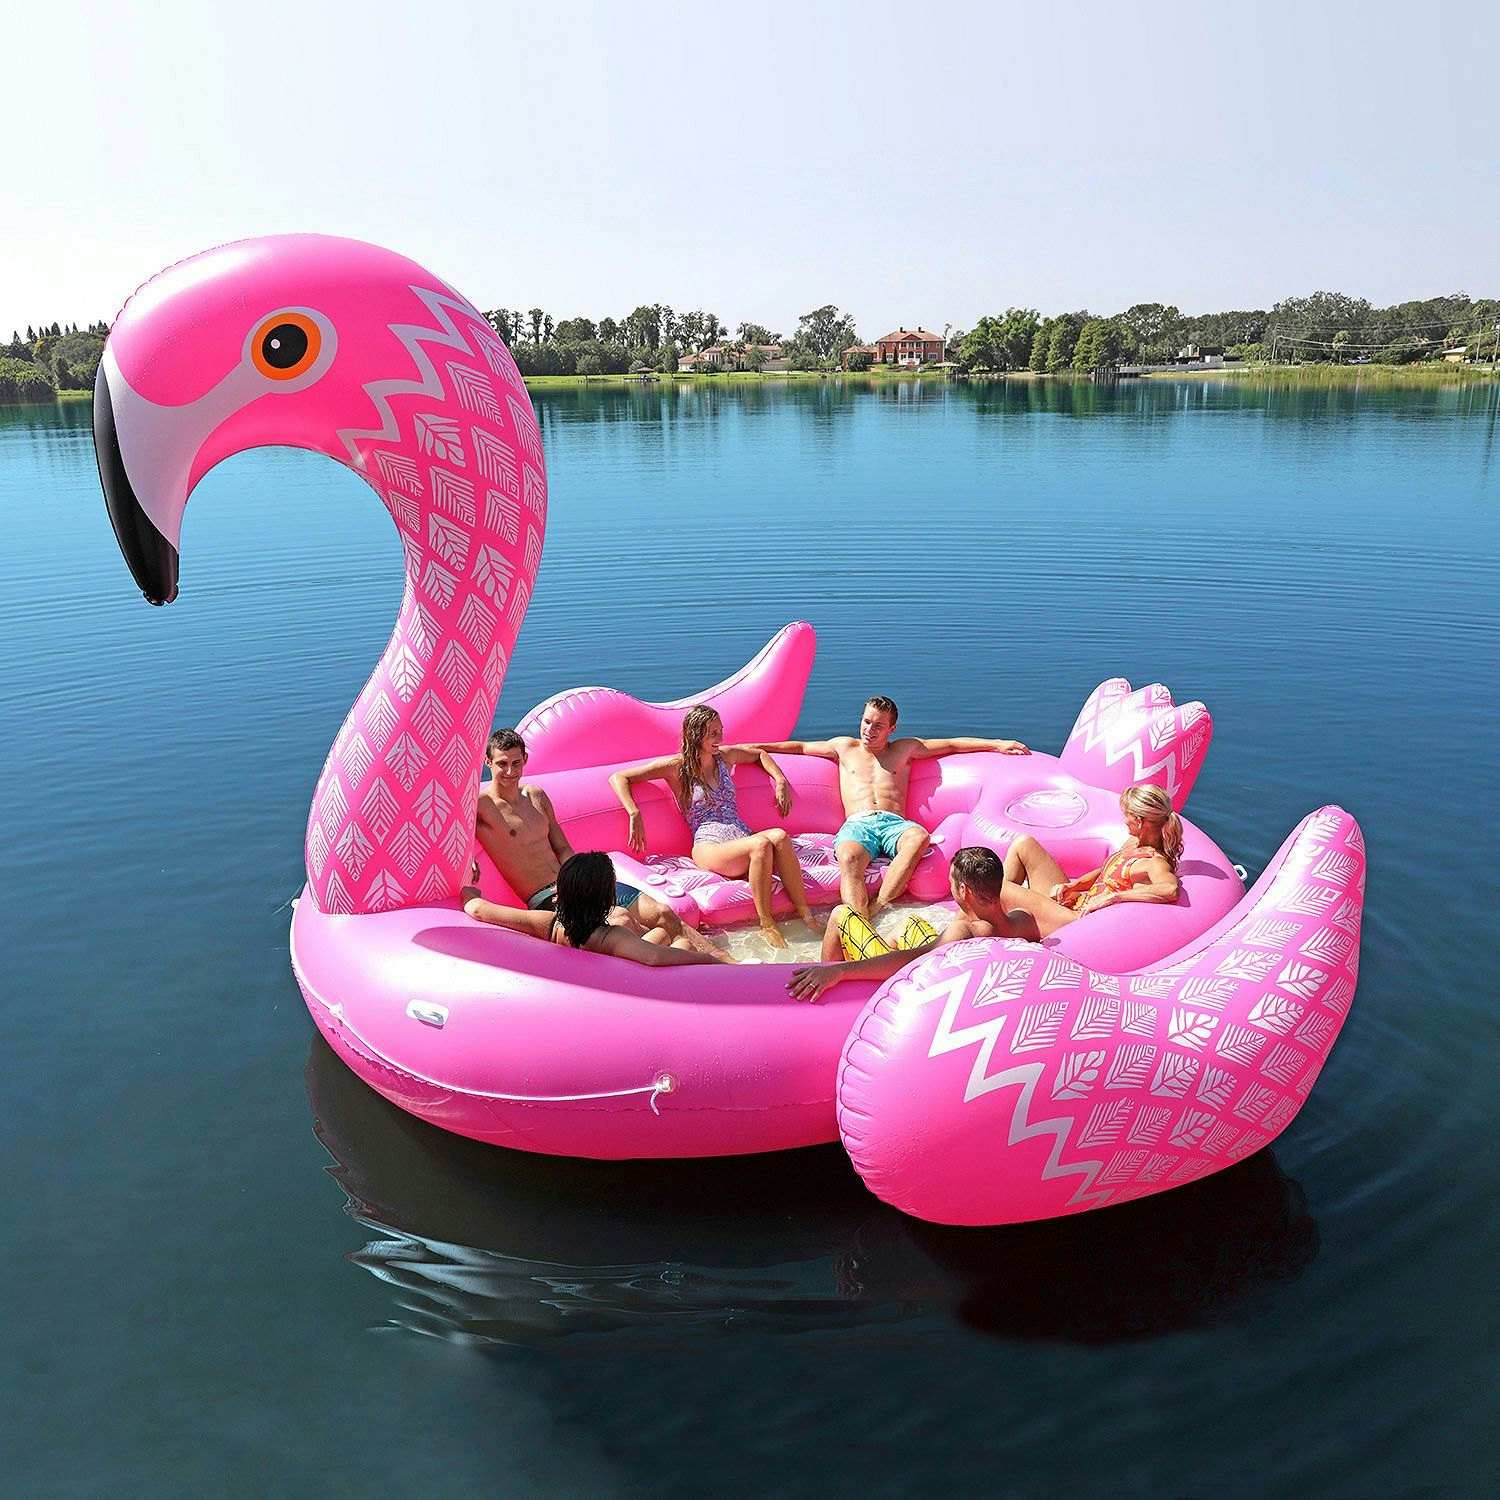 INFLATABLE ANIMAL DOUBLES PACK PARROT MONKEY FLAMINGO SUMMER JUNGLE FLOATS 